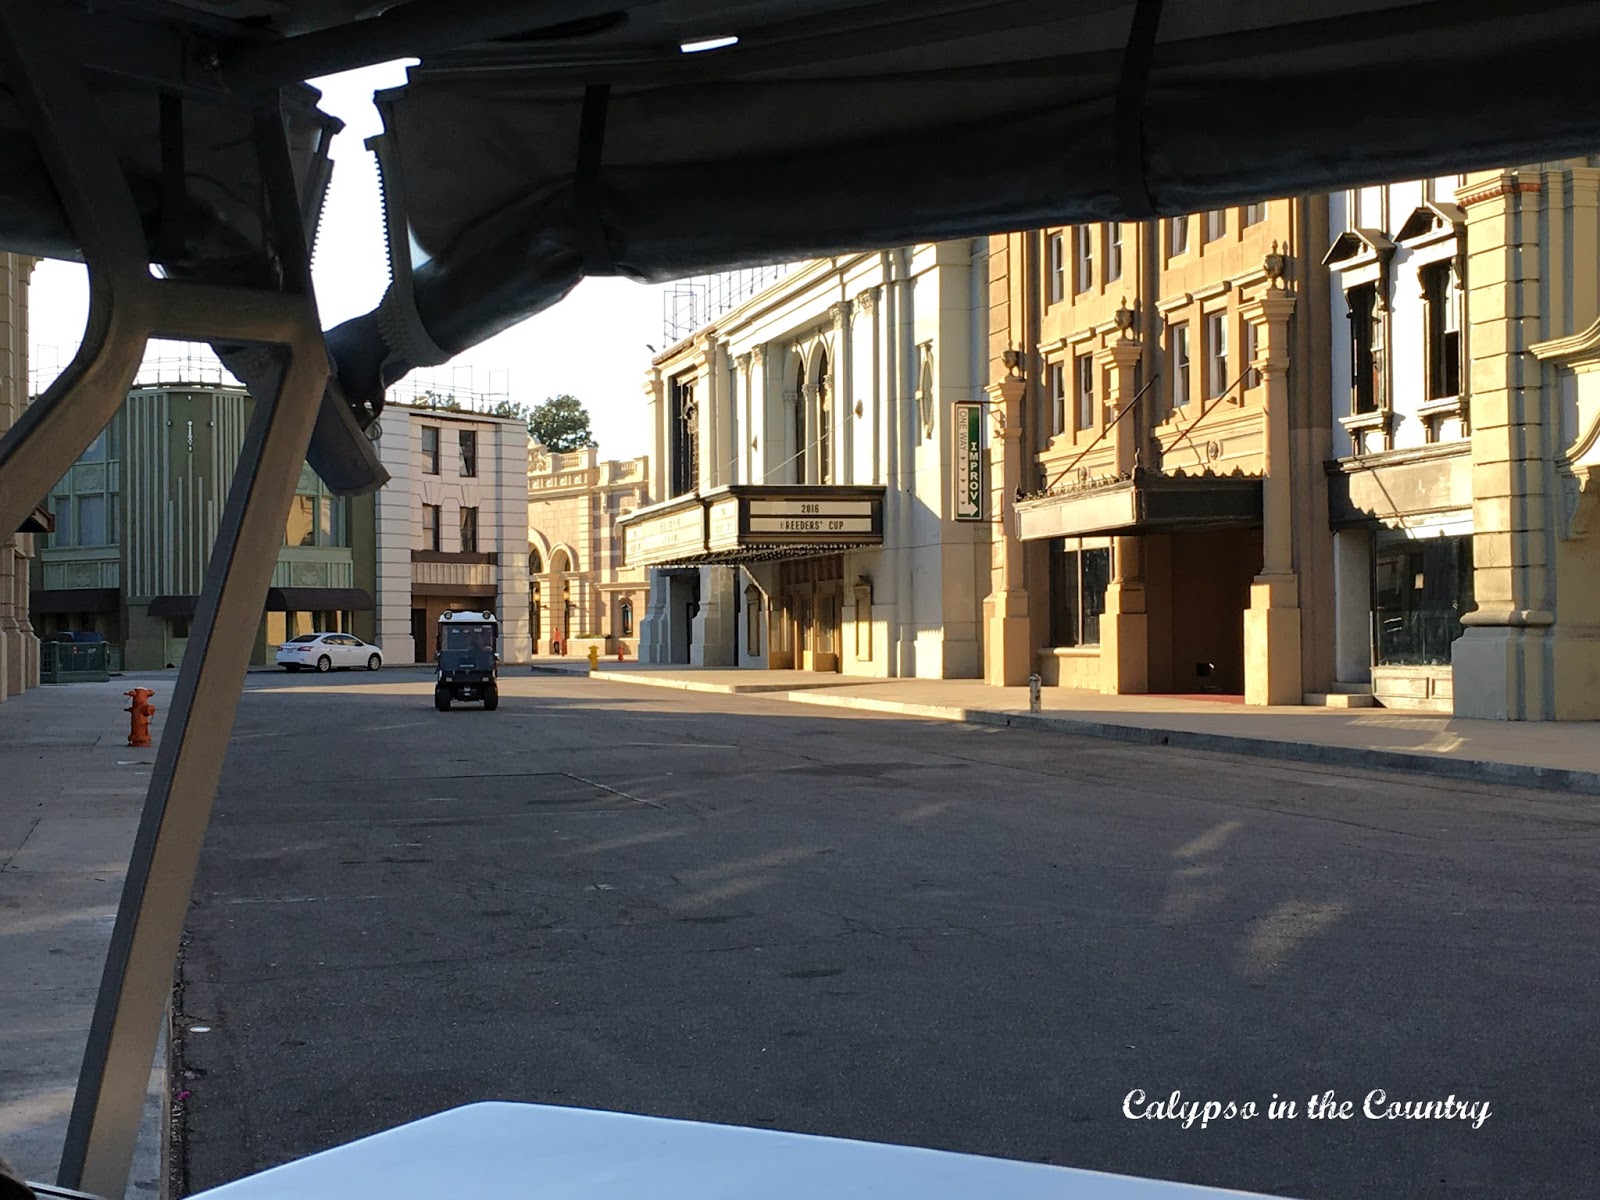 WB Studio backlots - fun tour for the whole family!